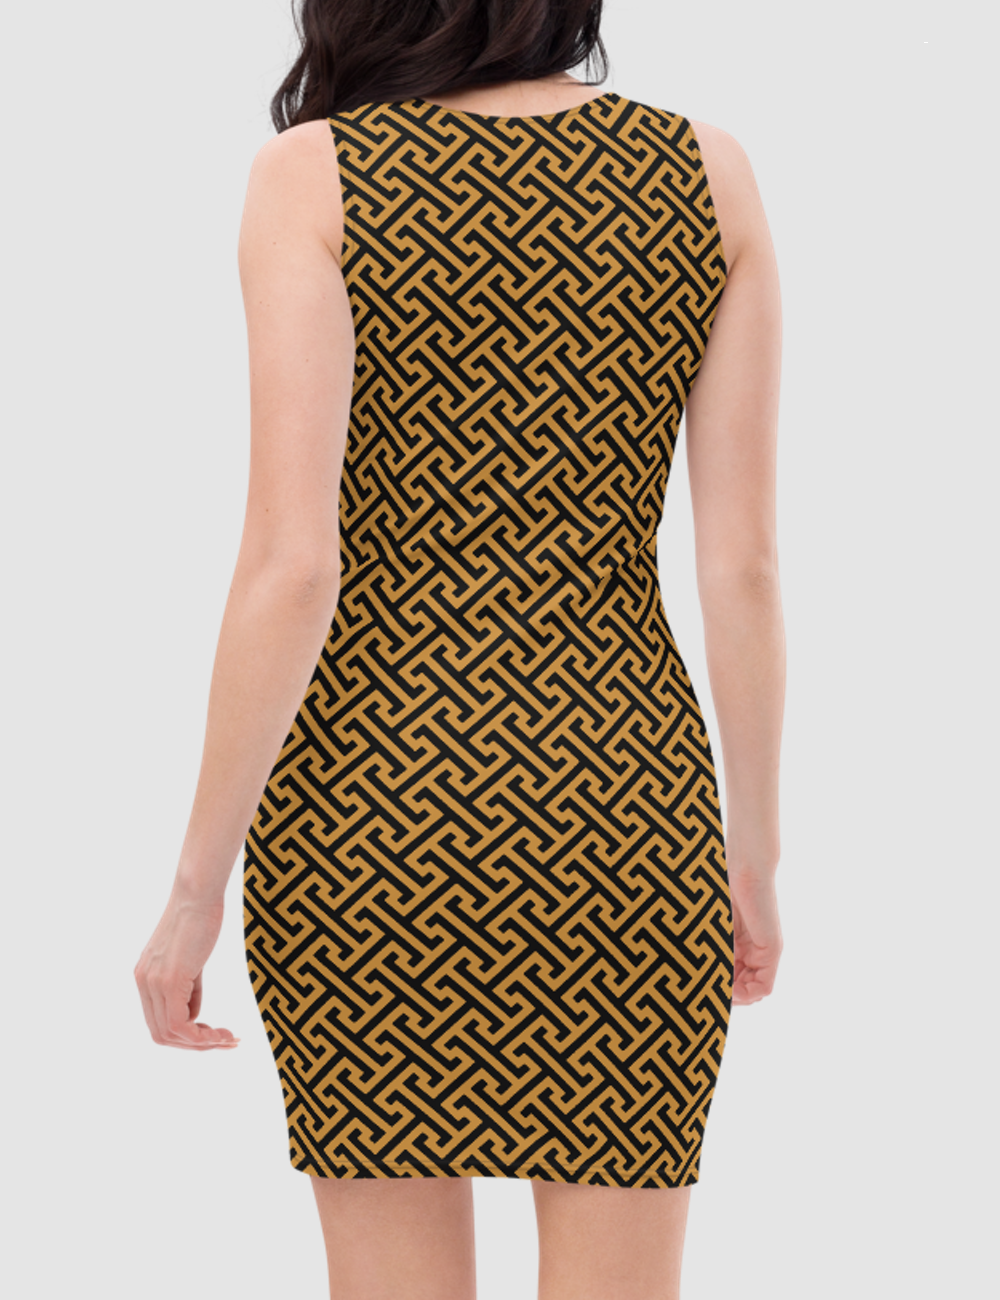 Byblos | Women's Sleeveless Fitted Sublimated Dress OniTakai